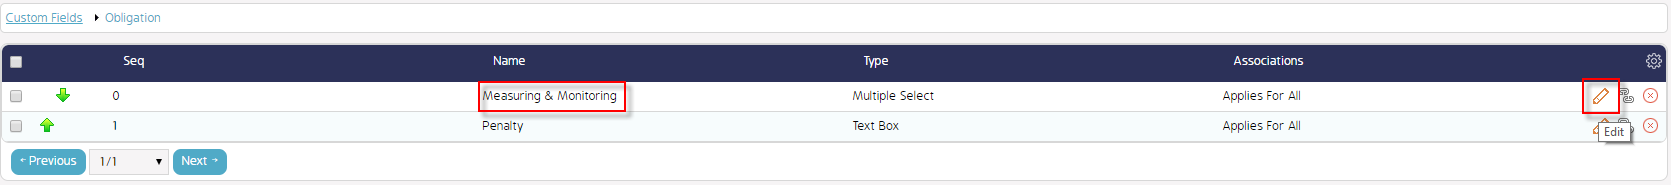 How to make Custom fields visible in Obligation Advanced Filters-3.png